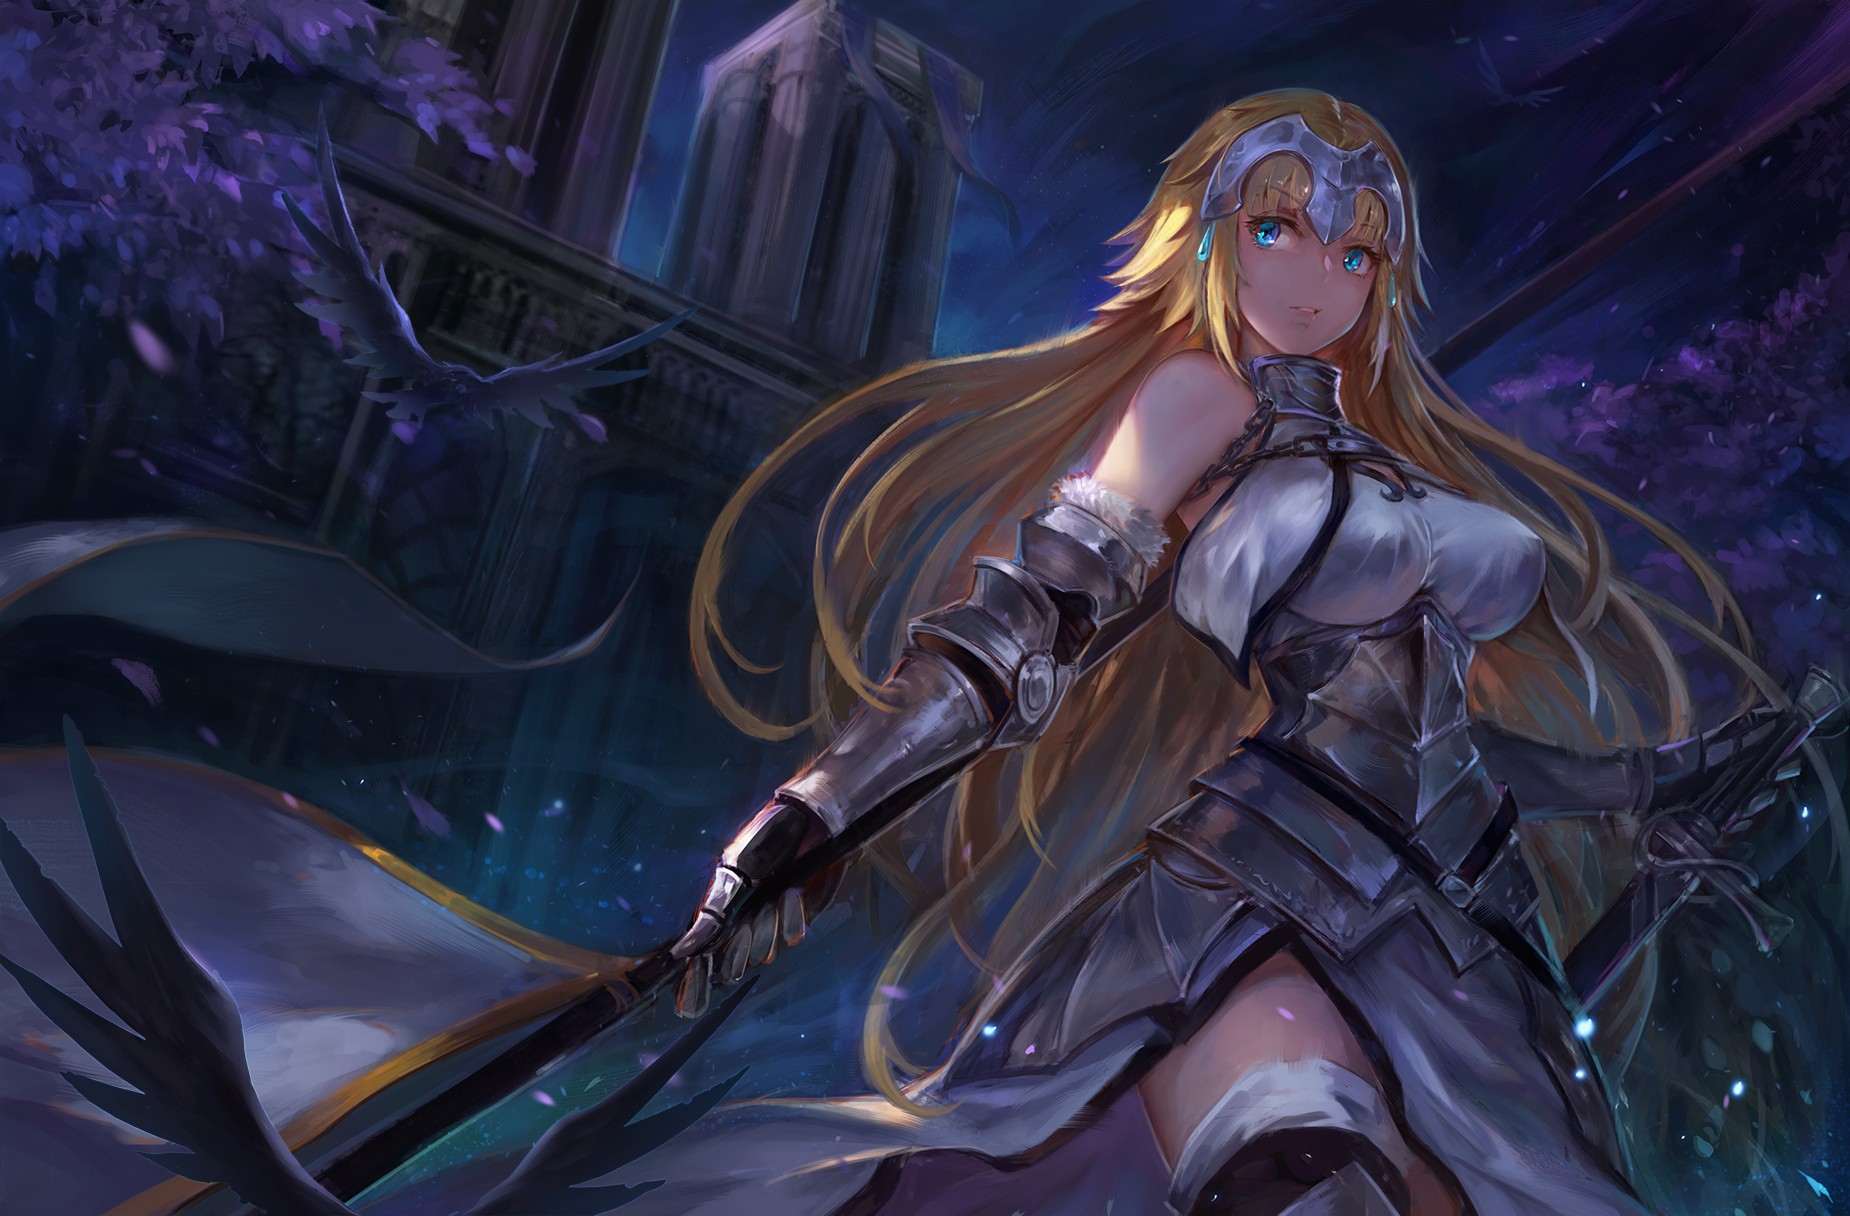 Anime 1850x1216 aqua eyes armor birds blonde building chains dark elbow gloves Fate series gloves headdress long hair petals sword weapon anime girls big boobs anime Ruler (Fate/Grand Order) figure-hugging armor low-angle bare shoulders